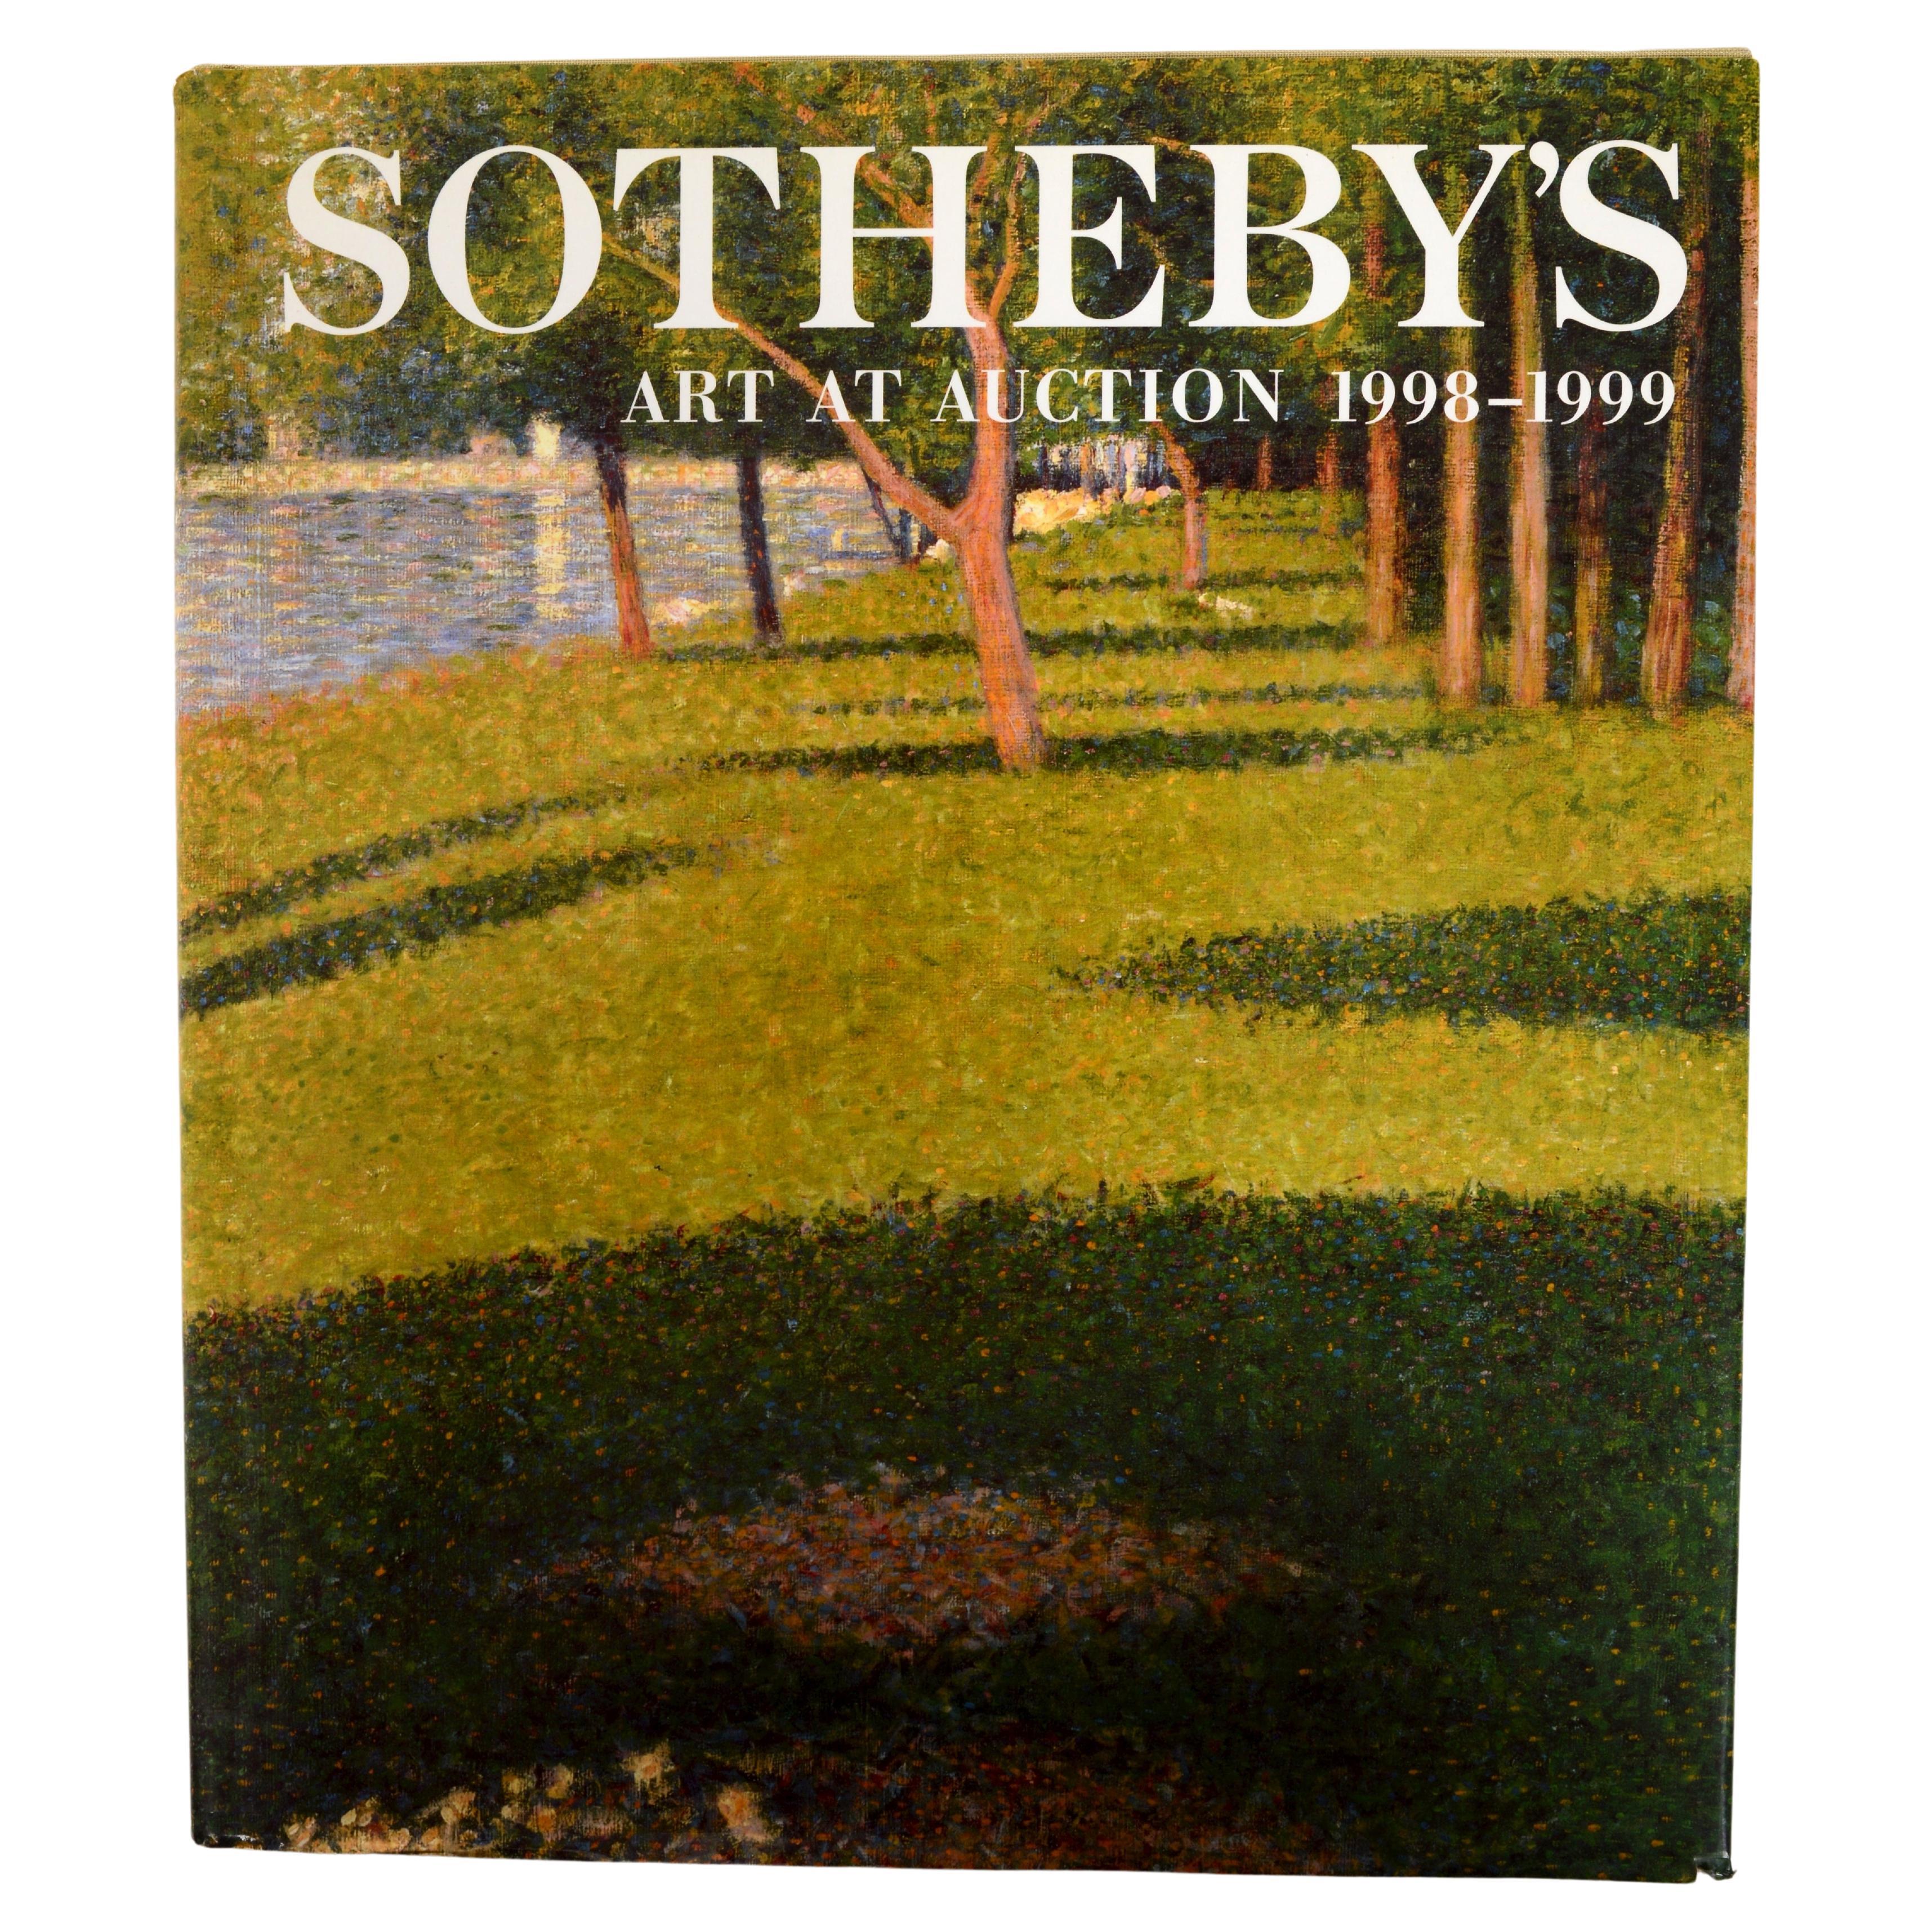 Sotheby's Art At Auction 1998-1999 Edited by Emma Lawson, 1st Ed For Sale